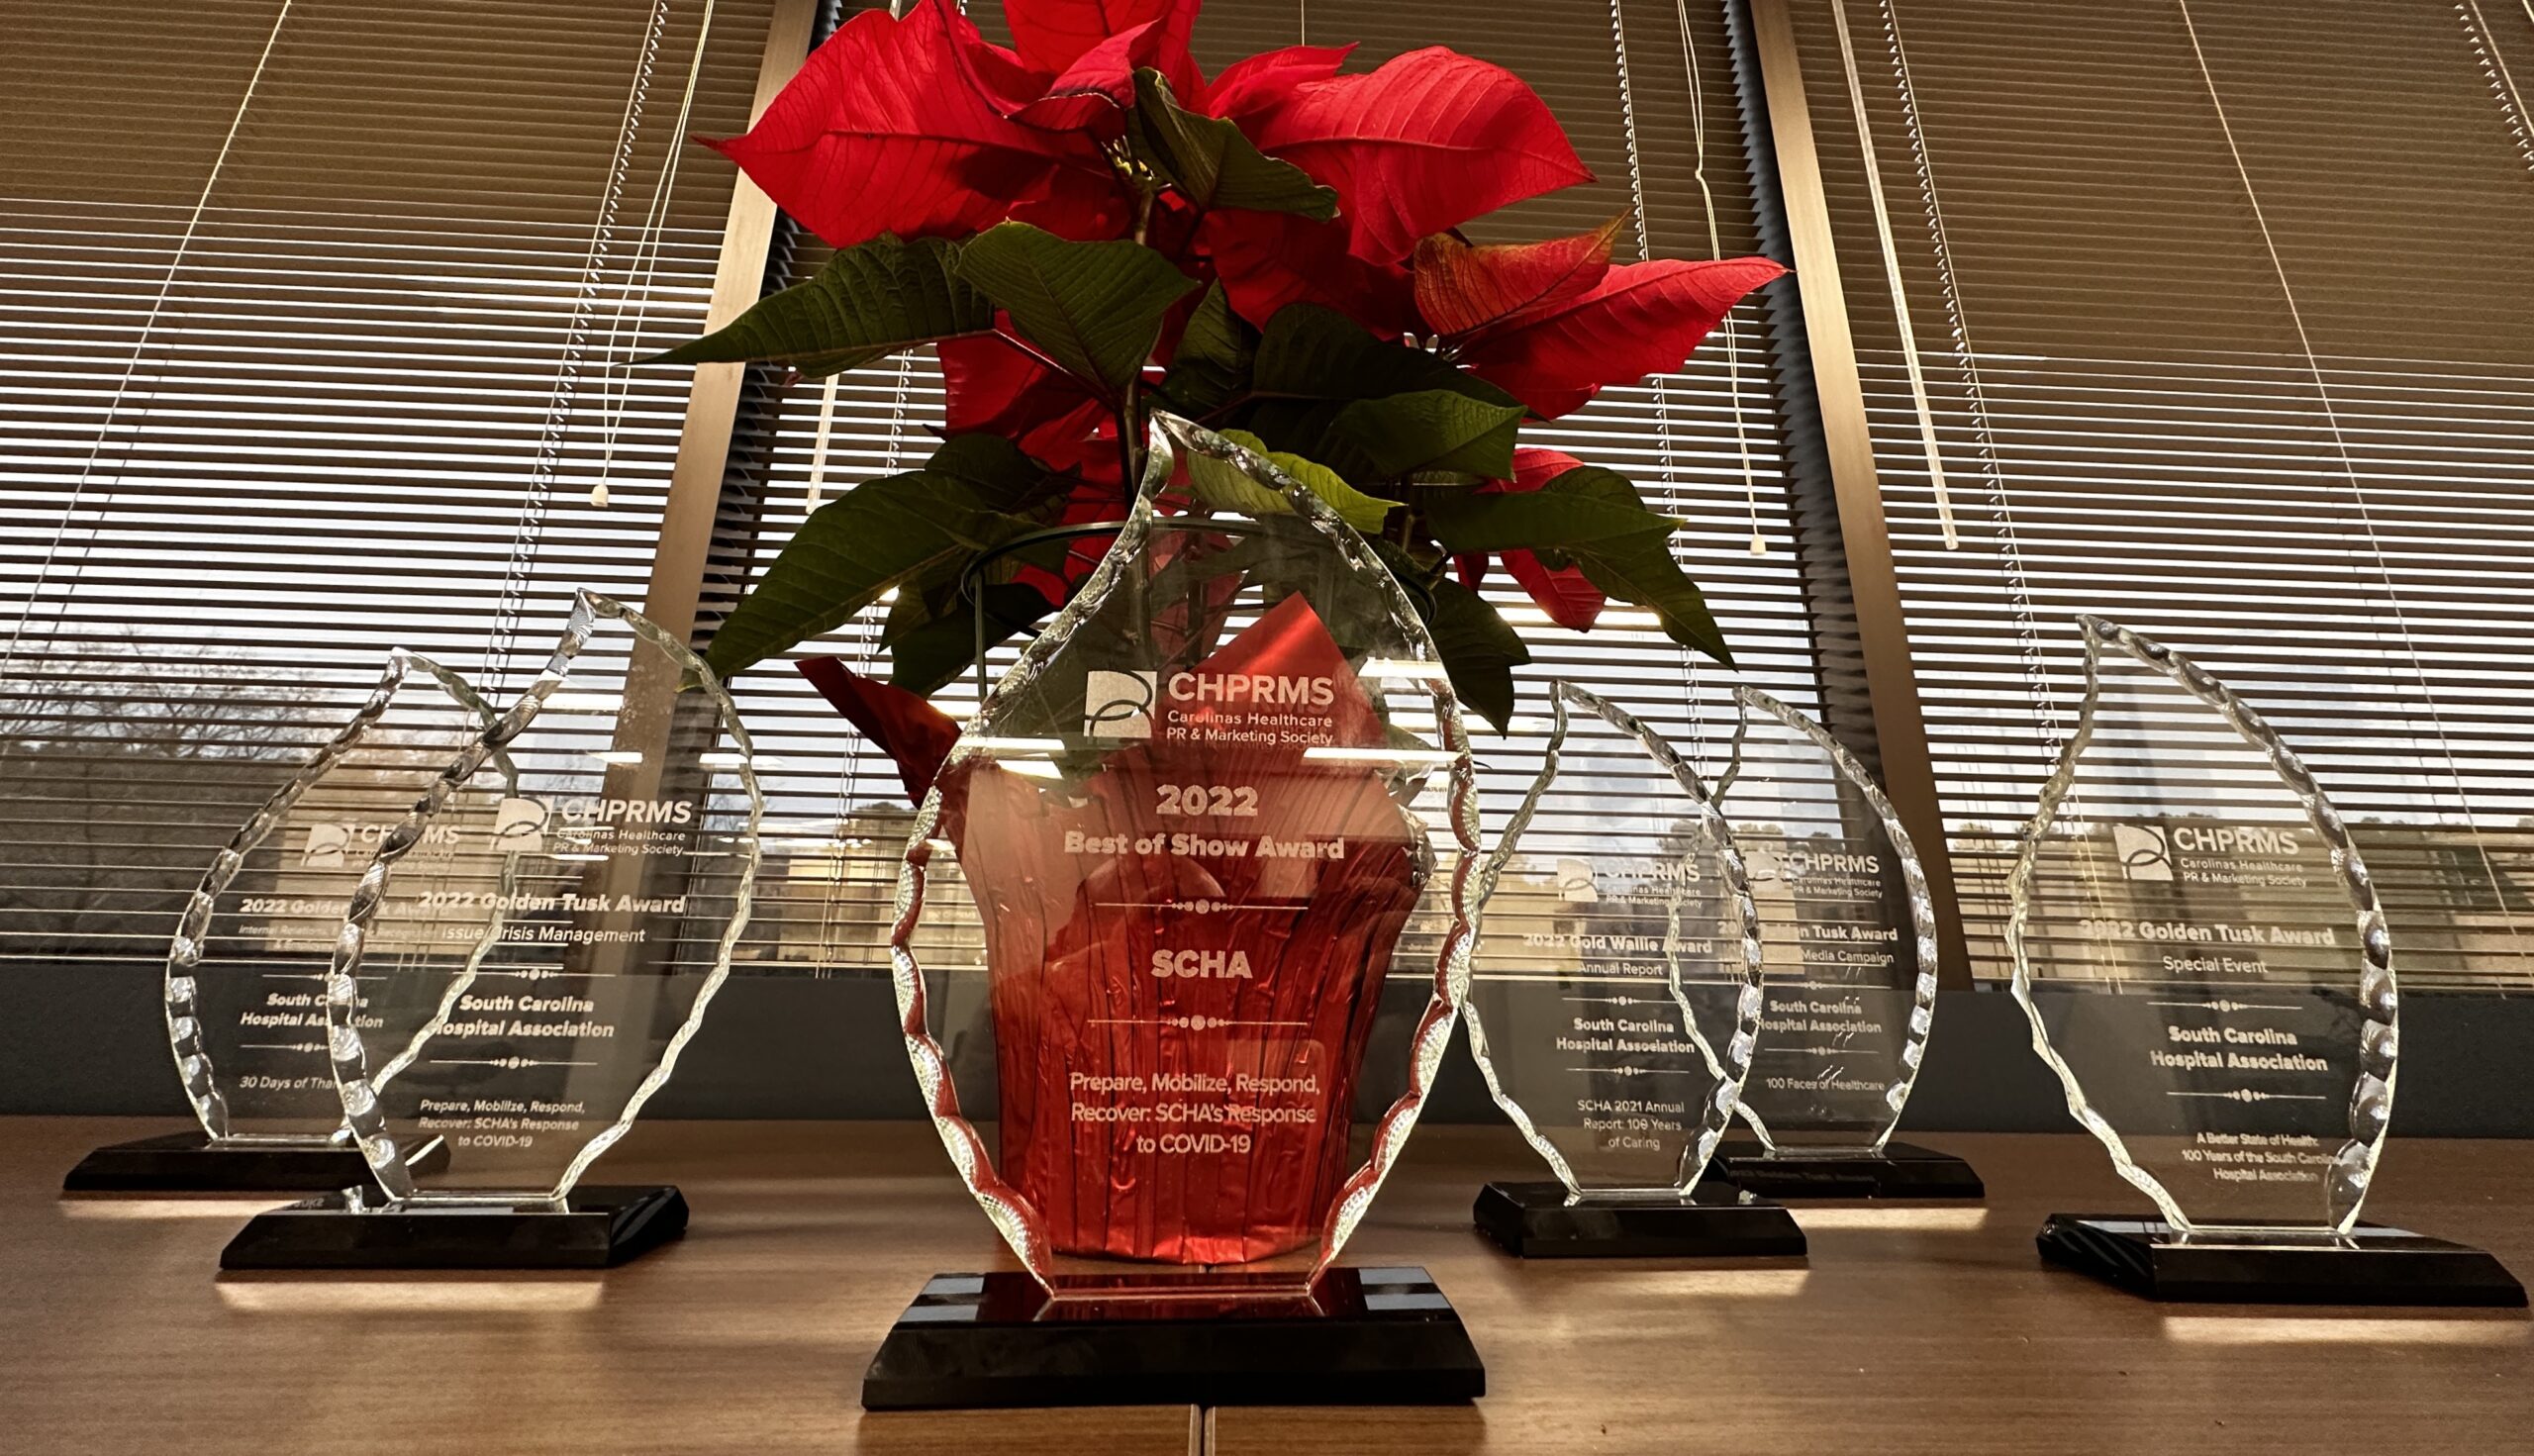 6 glass trophies in front of a red Christmas poinsettia plant.